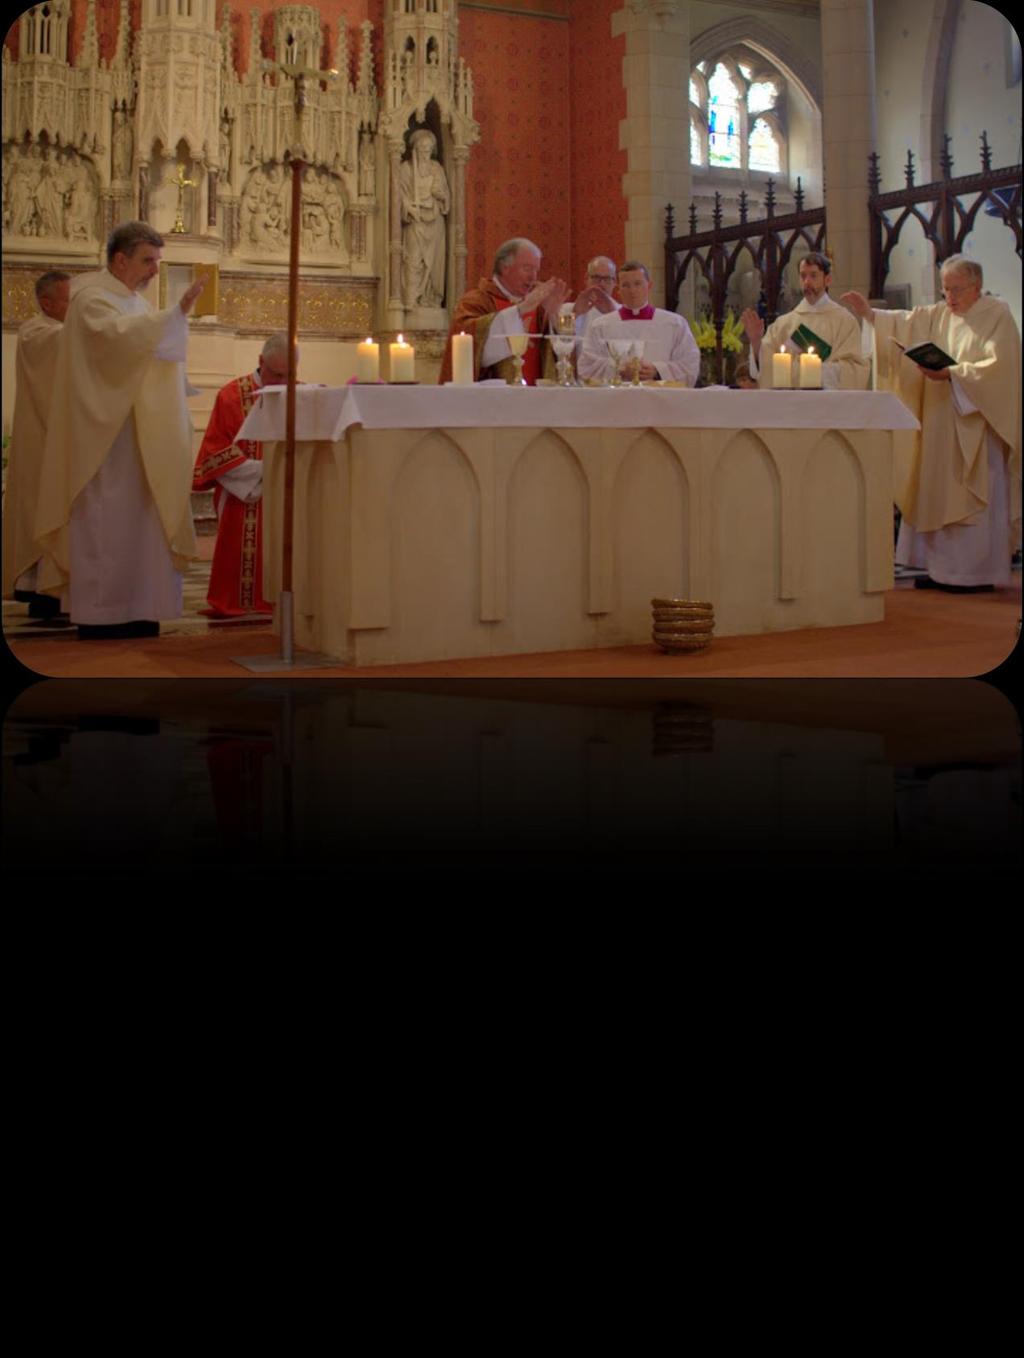 The Liturgy of the Eucharist Bishop Philip usually uses Eucharistic Prayer III with the additional petition praying for the newly Confirmed. Holy Communion is to be distributed under both kinds.